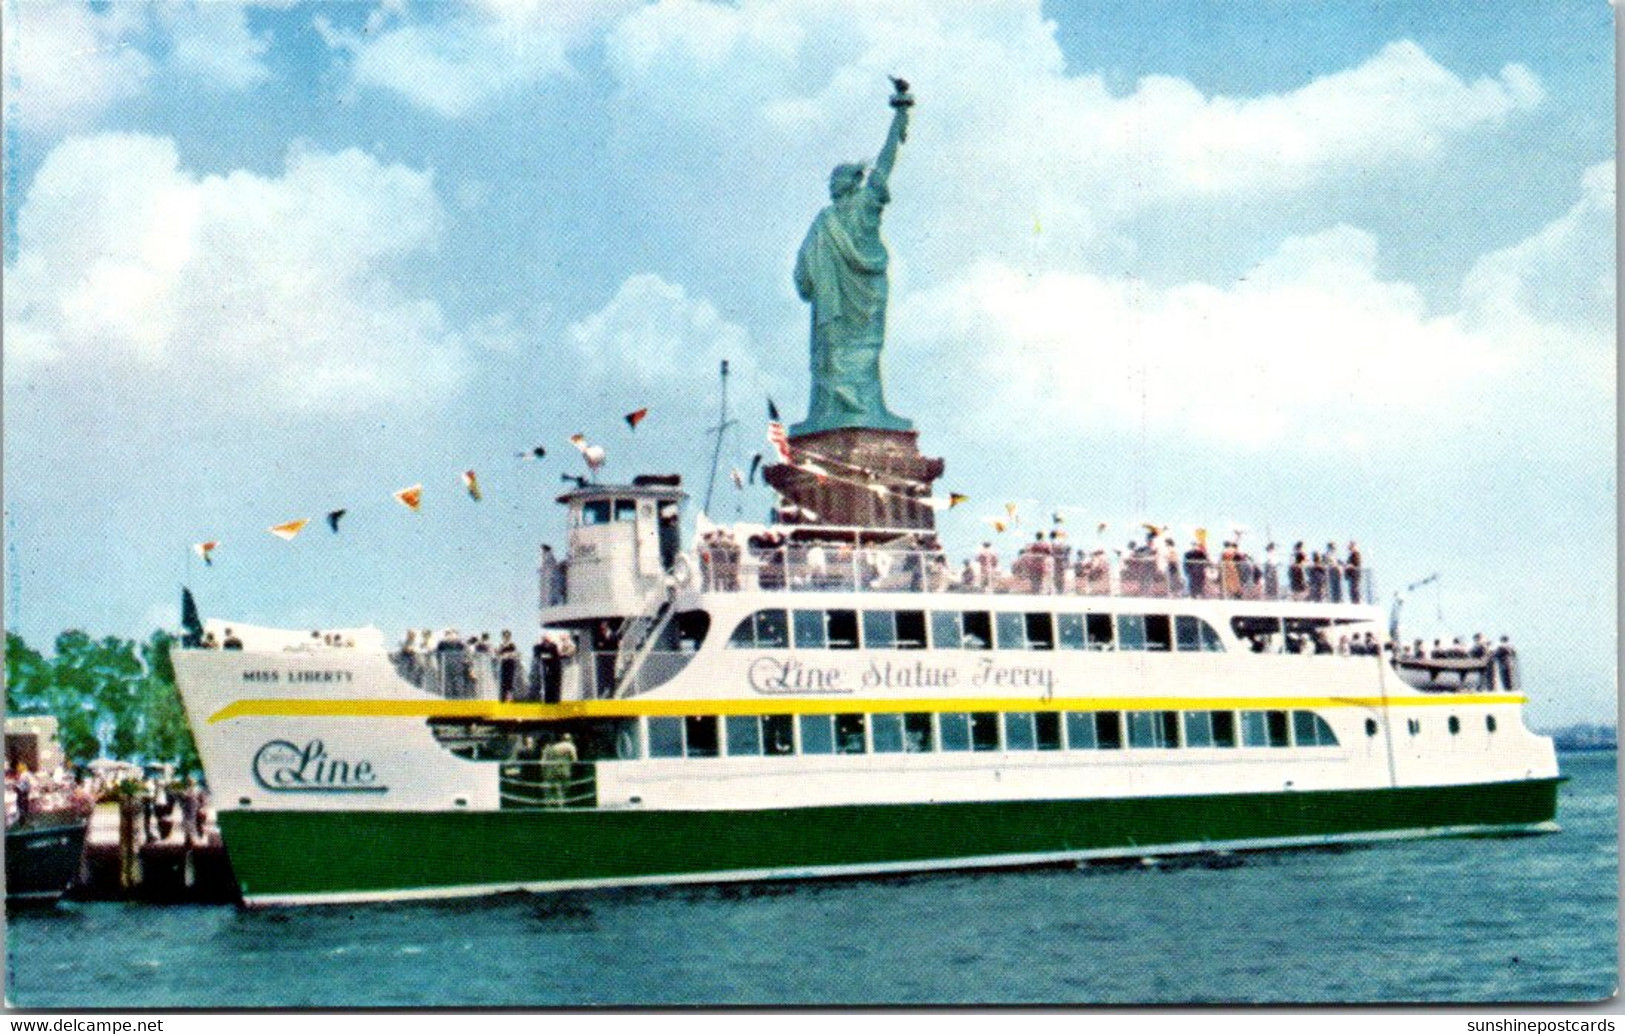 New York City Statue Of Liberty And "Miss Liberty" Circle Line Statue Ferry - Statue Of Liberty